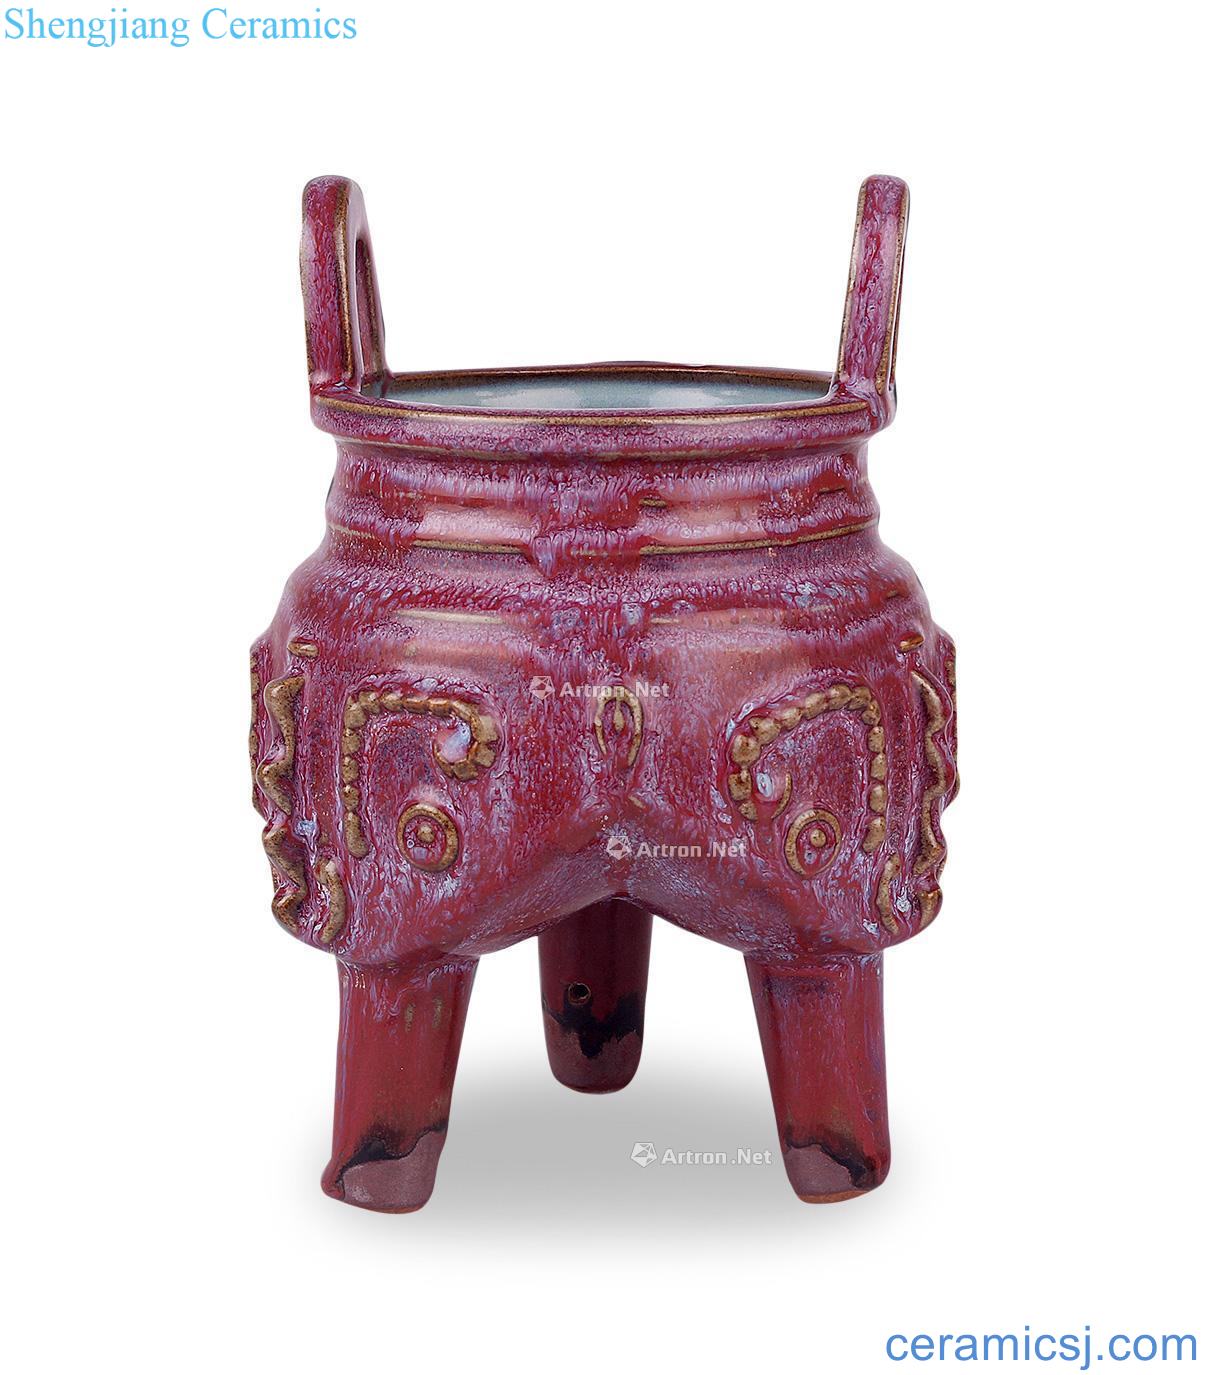 The song dynasty Pa rose violet three-legged tripod